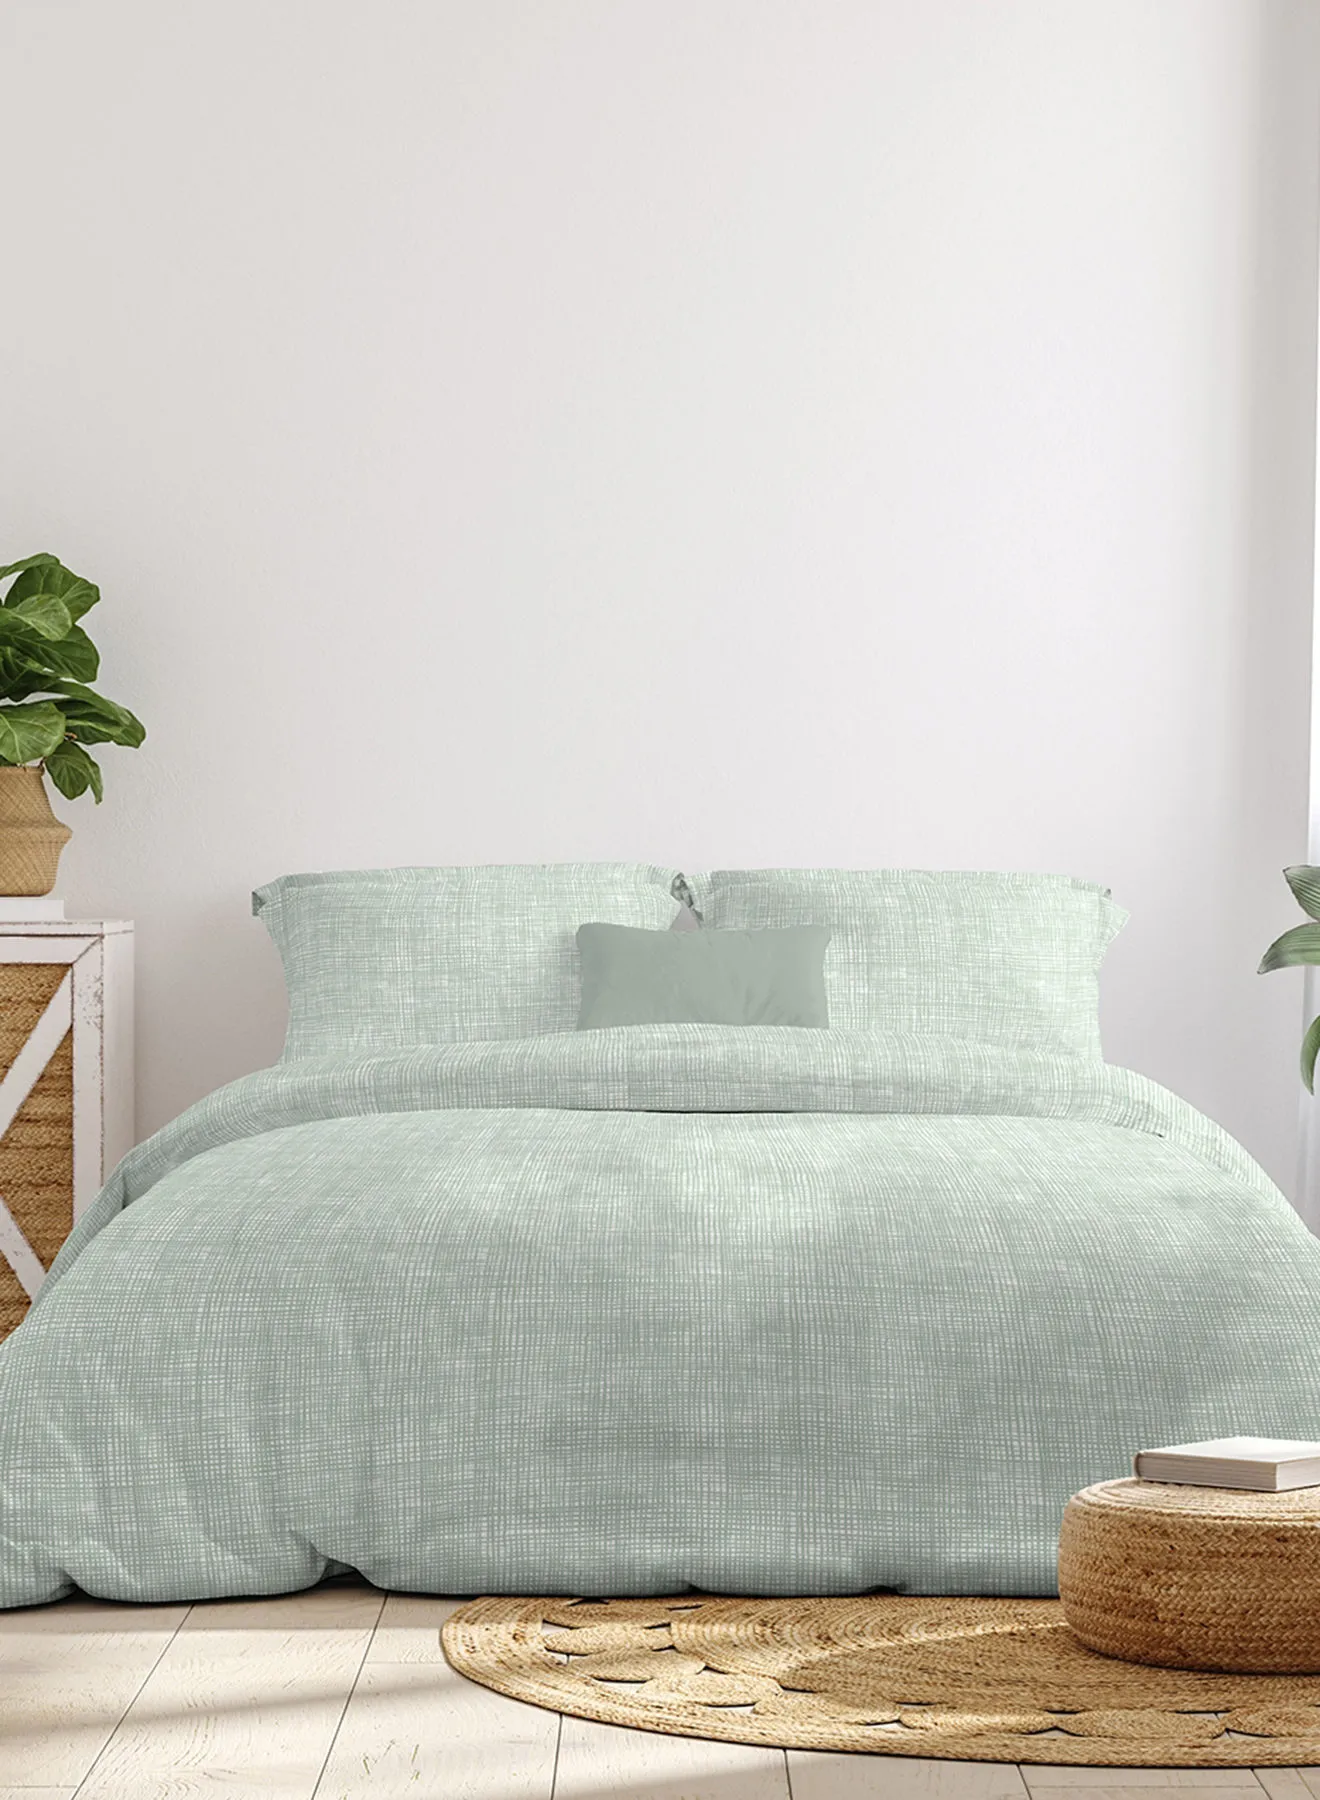 Amal Comforter Set Queen Size All Season Everyday Use Bedding Set 100% Cotton 3 Pieces 1 Comforter 2 Pillow Covers  Sage Green